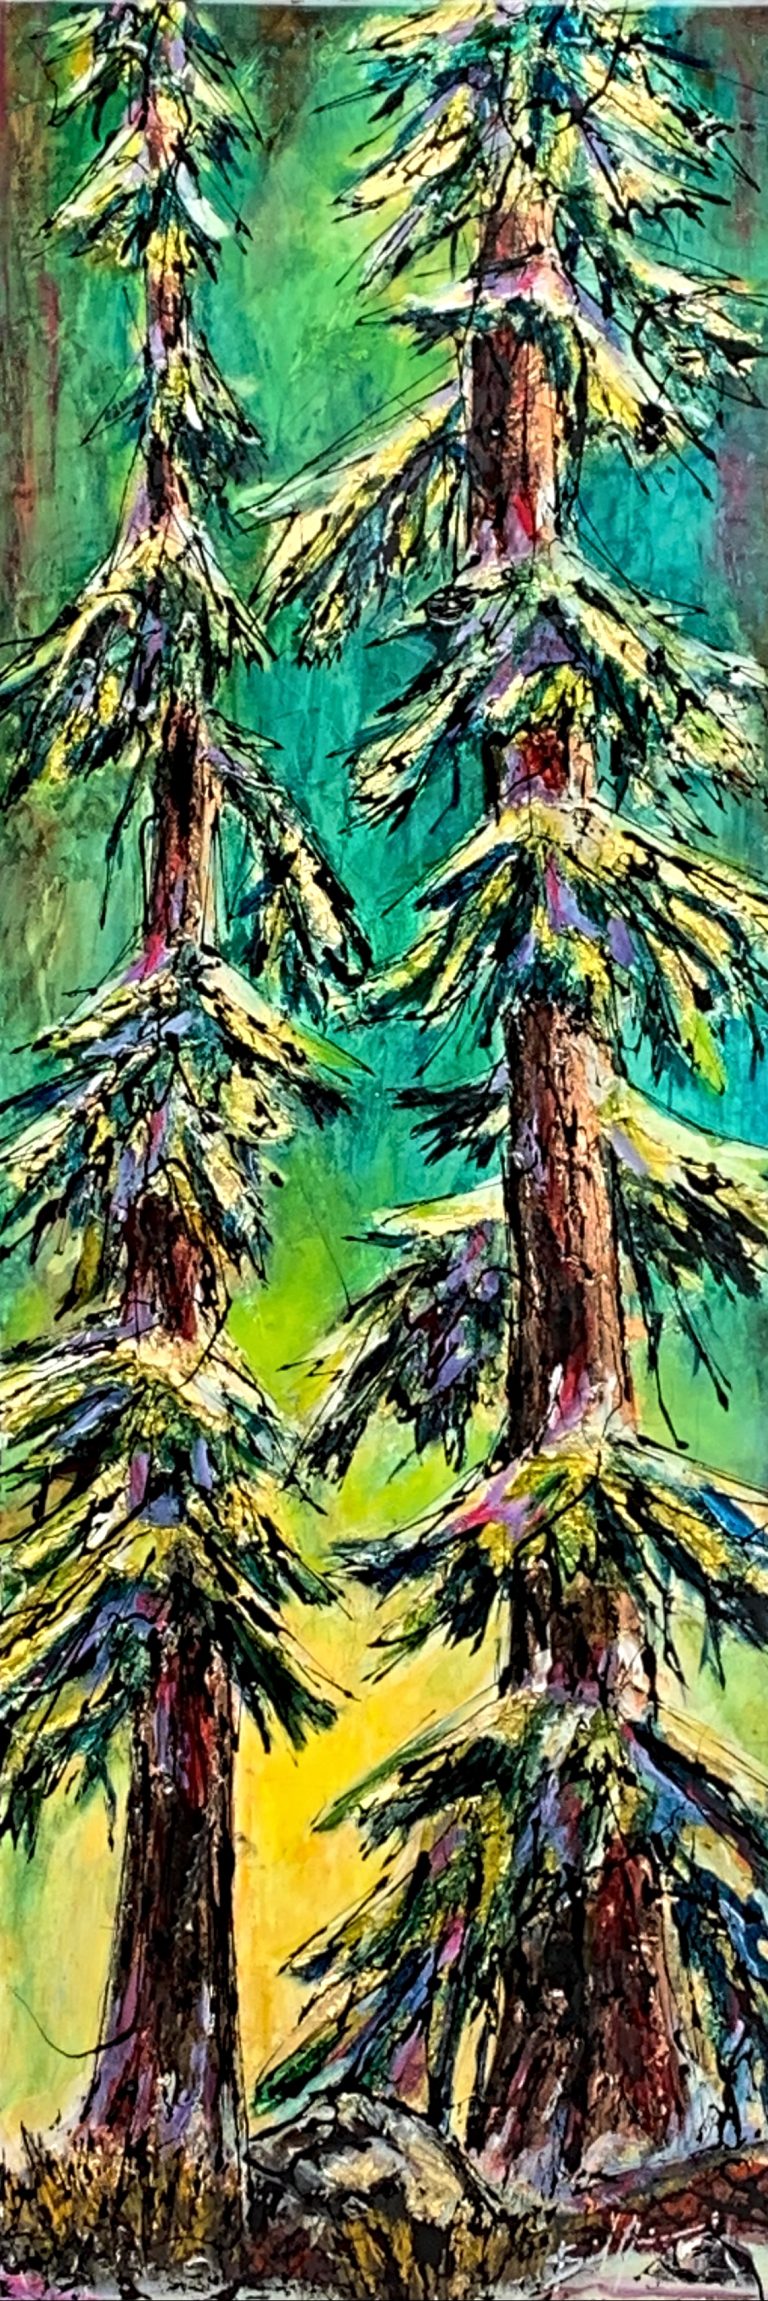 Taking it Easy, mixed media tree painting by David Zimmerman | Effusion Art Gallery + Cast Glass Studio, Invermere BC